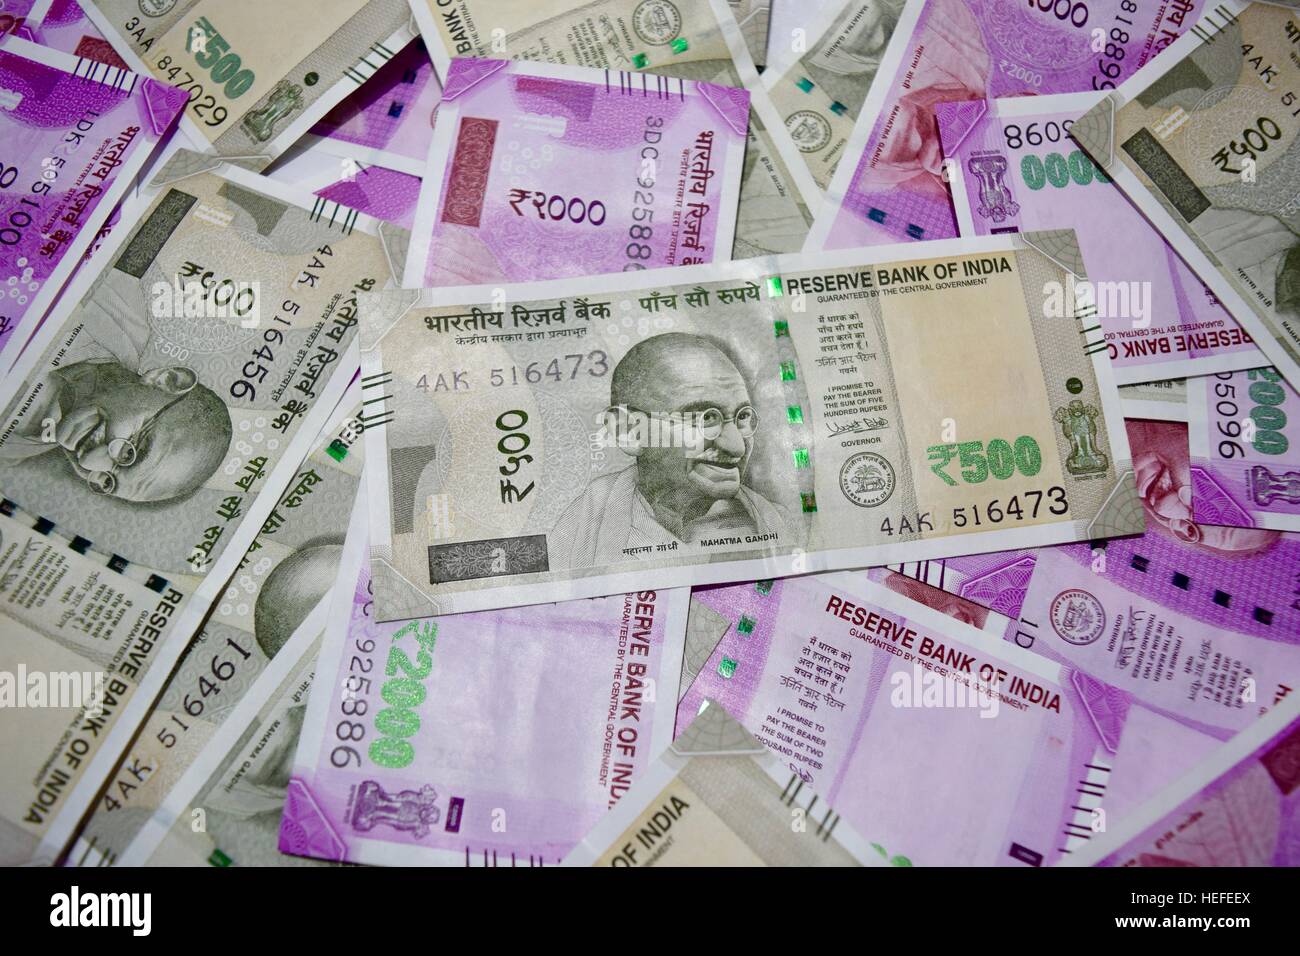 New Indian Paper currency Stock Photo